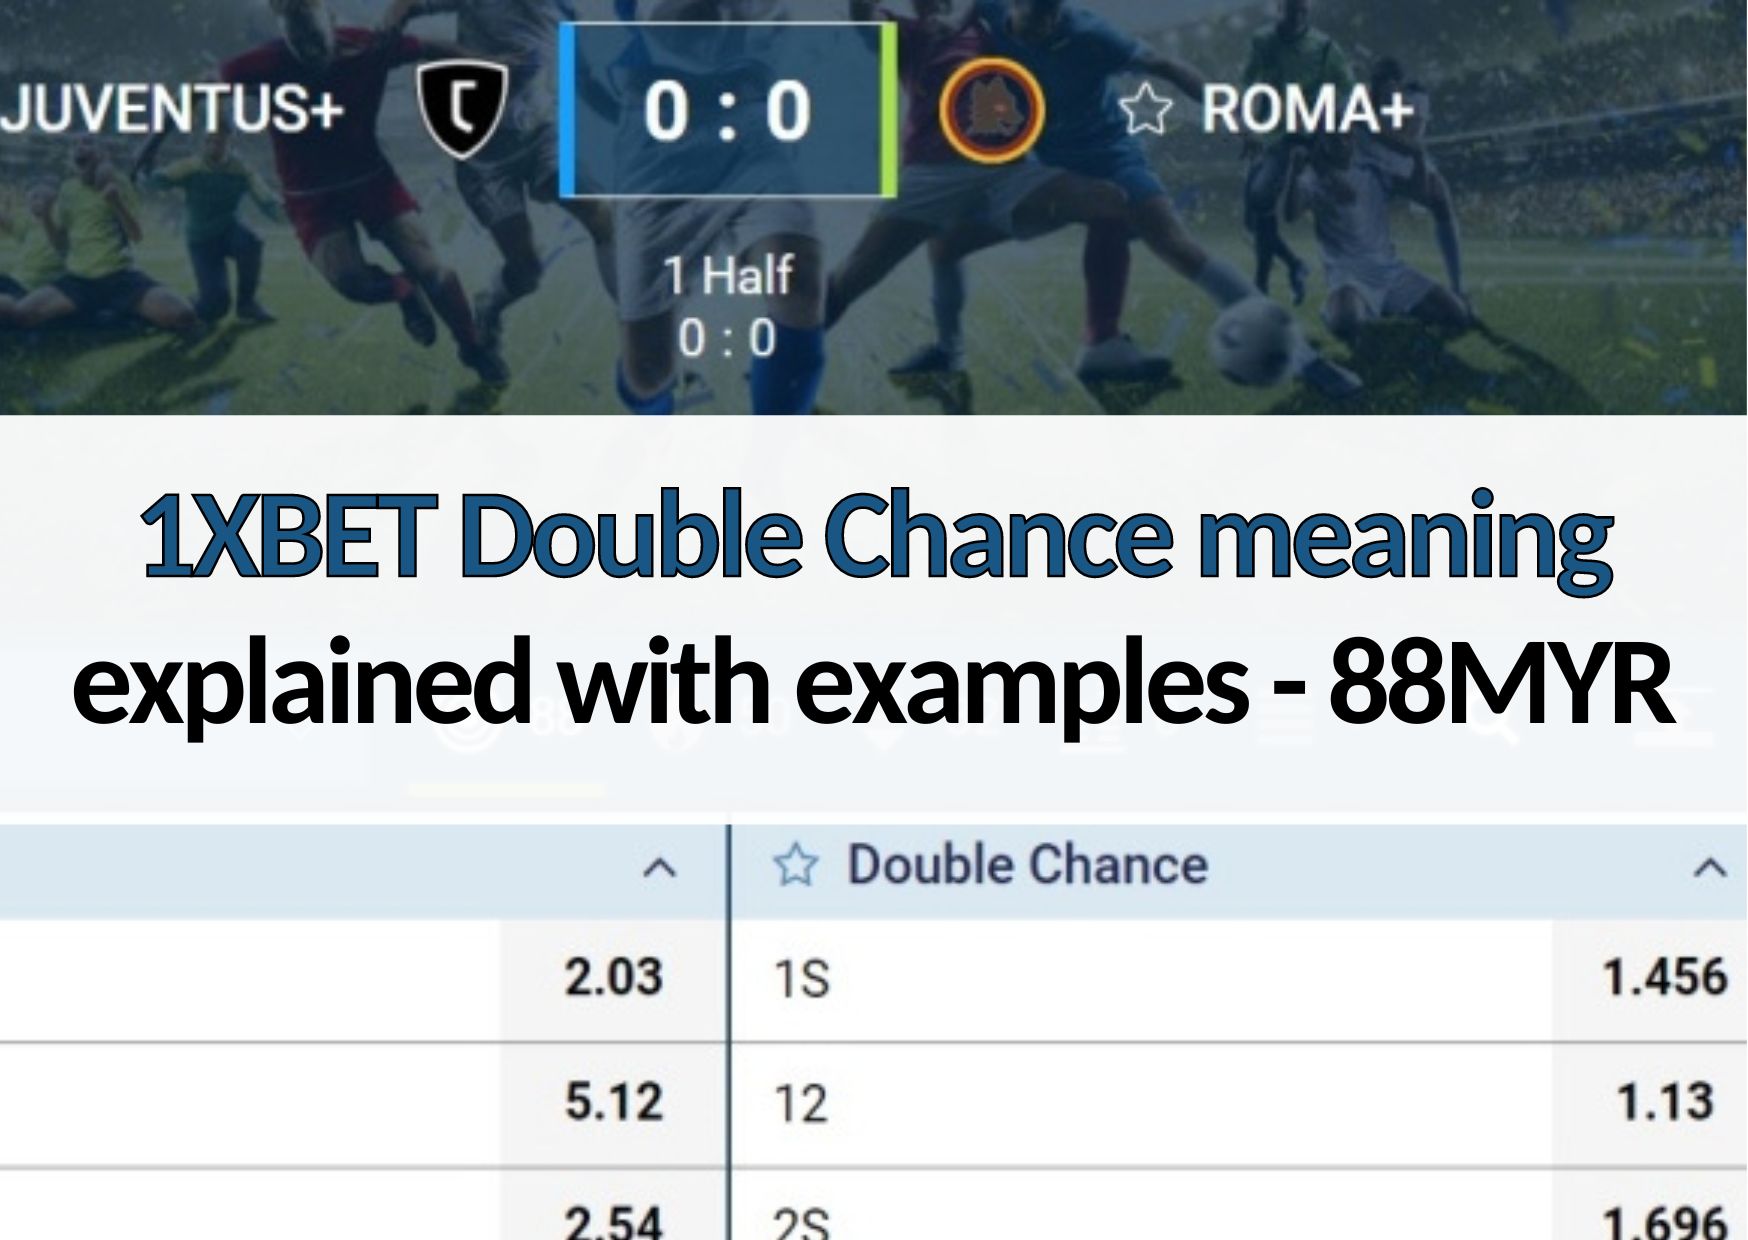 1xbet 88myr 1xbet double chance meaning explained